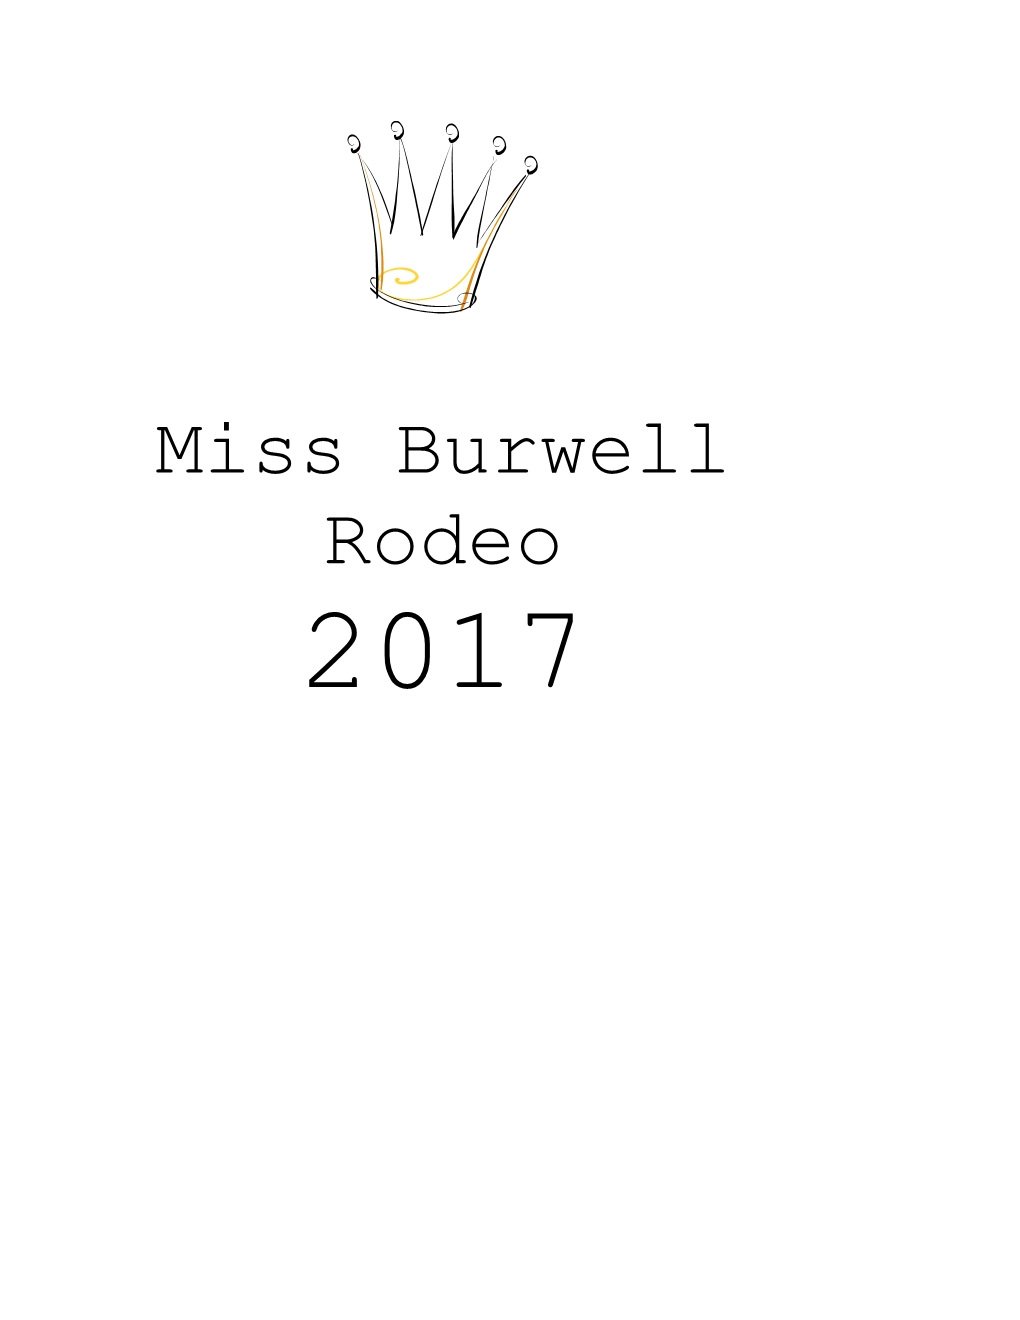 Welcome to the 2017 Miss Burwell Rodeo Pageant